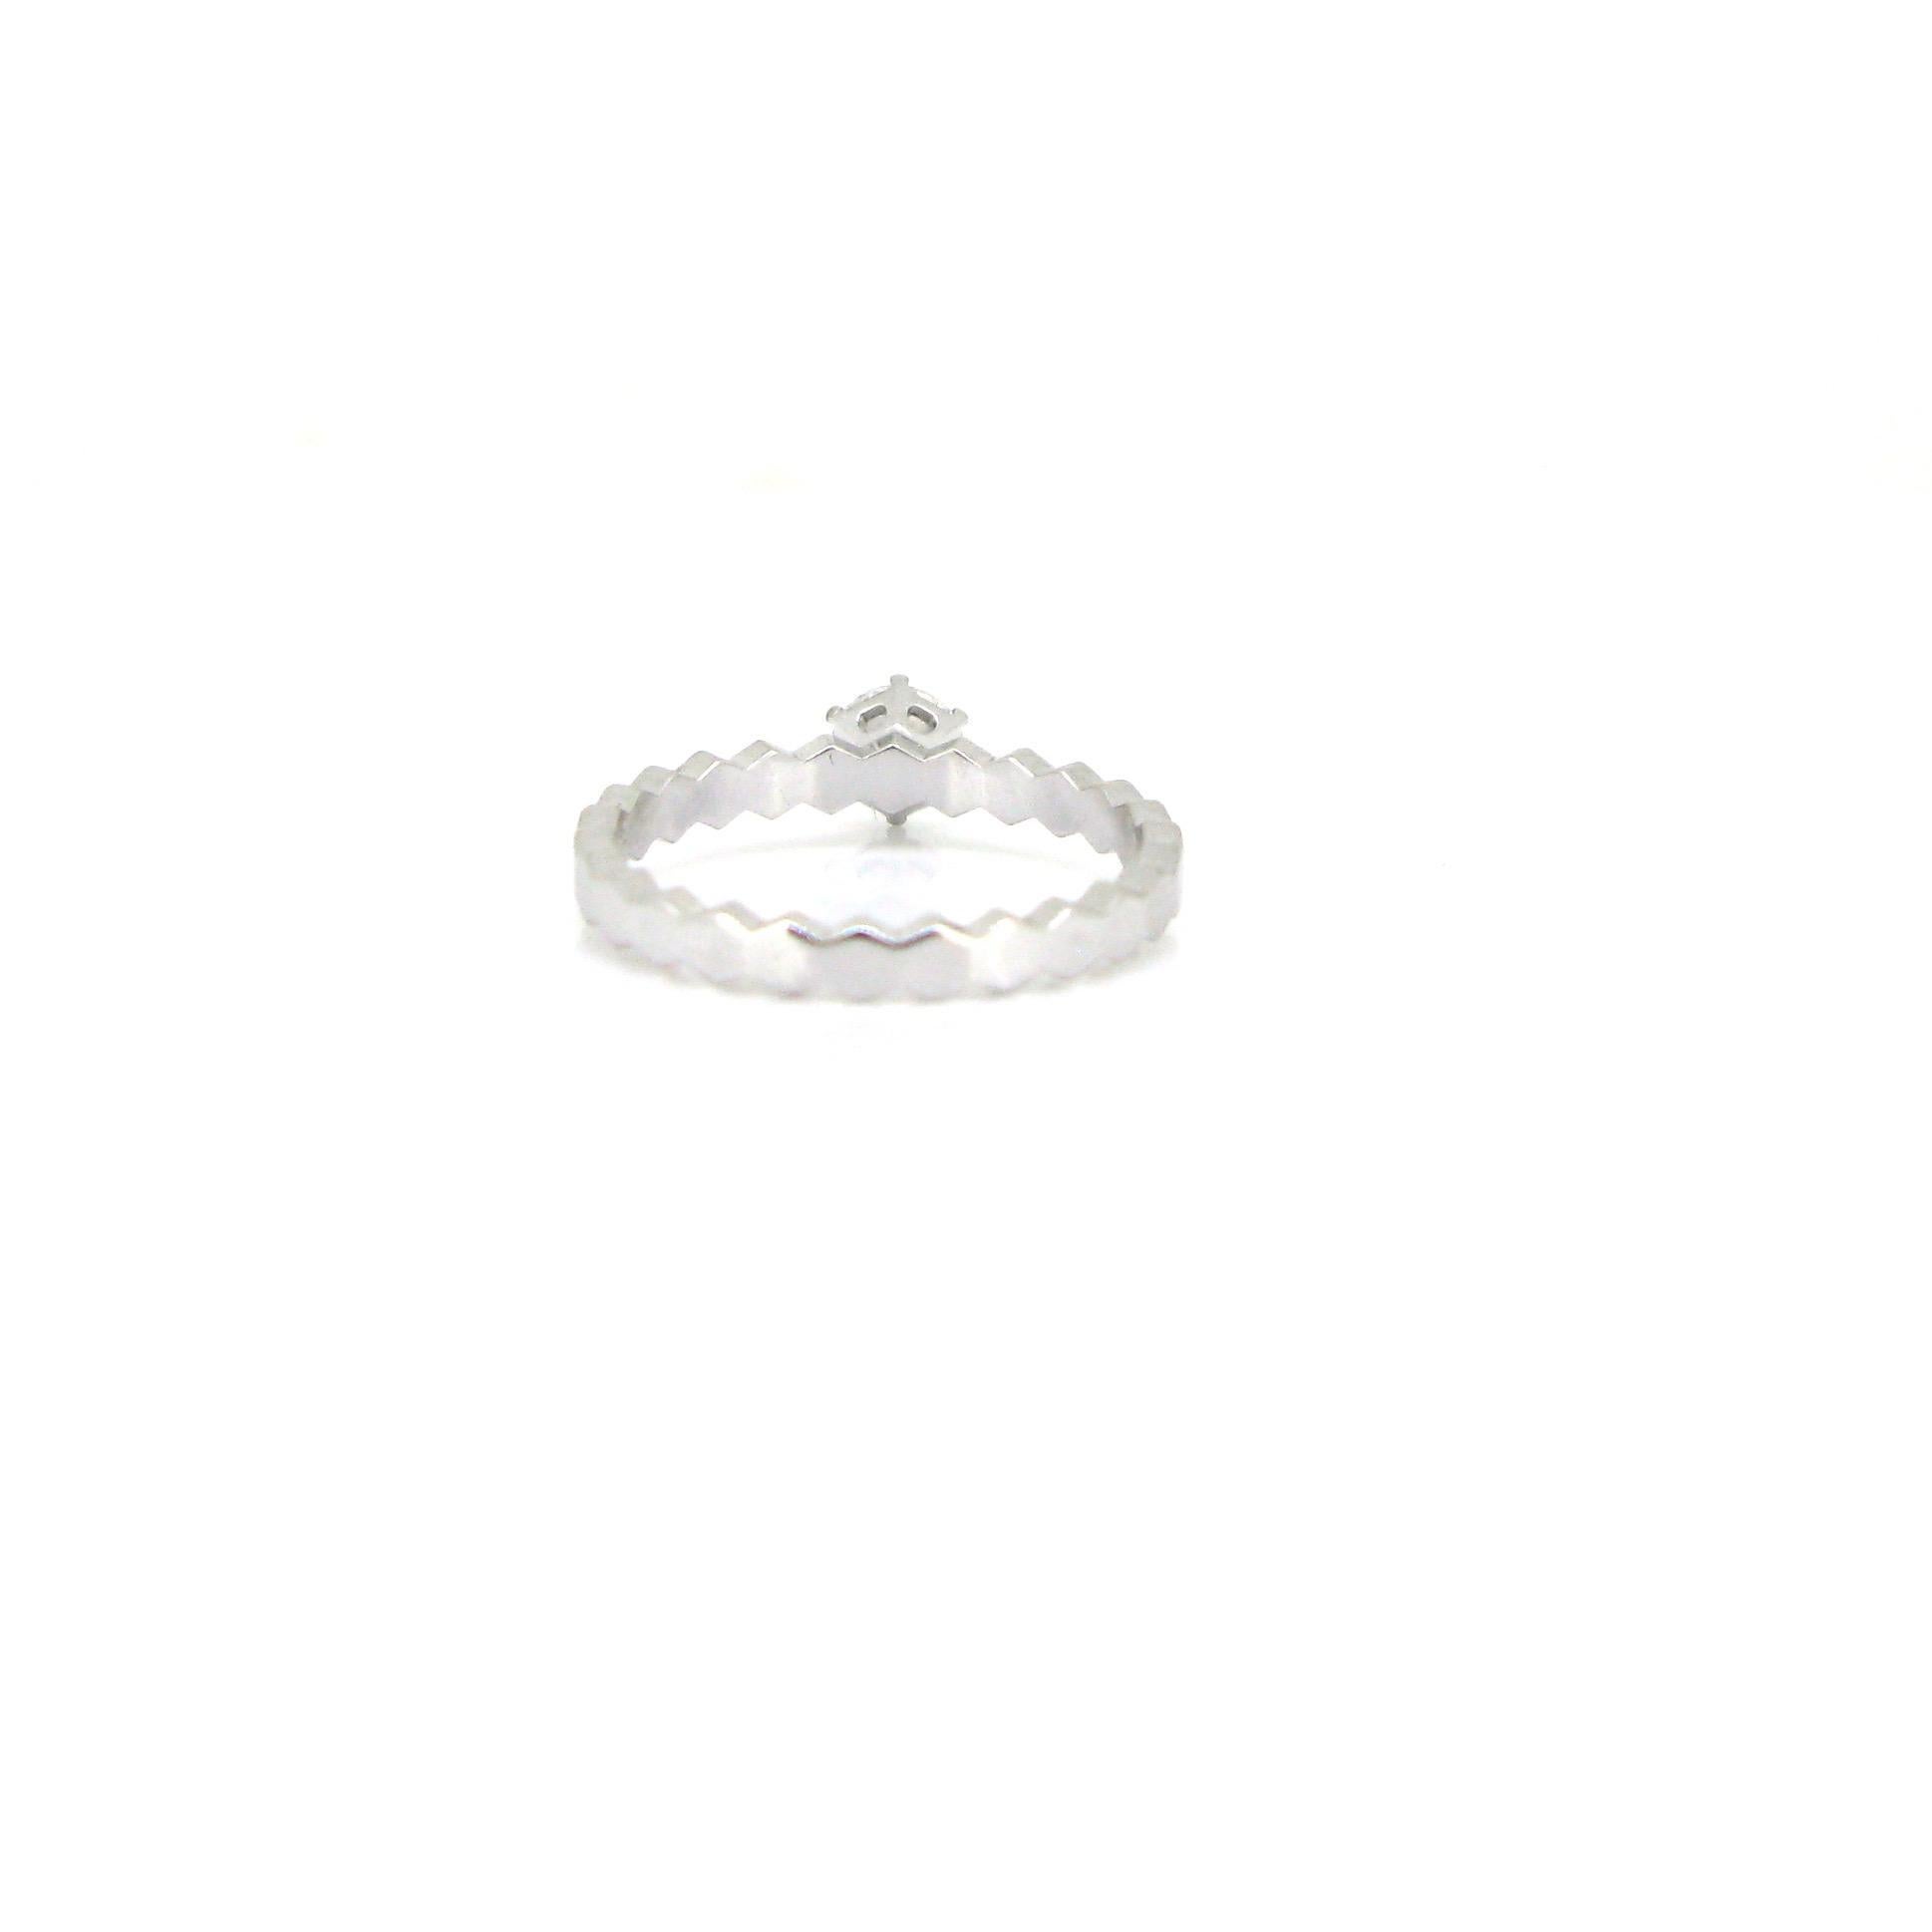 Modern Chaumet Bee My Love Solitaire Ring, 18 Karat White Gold, France